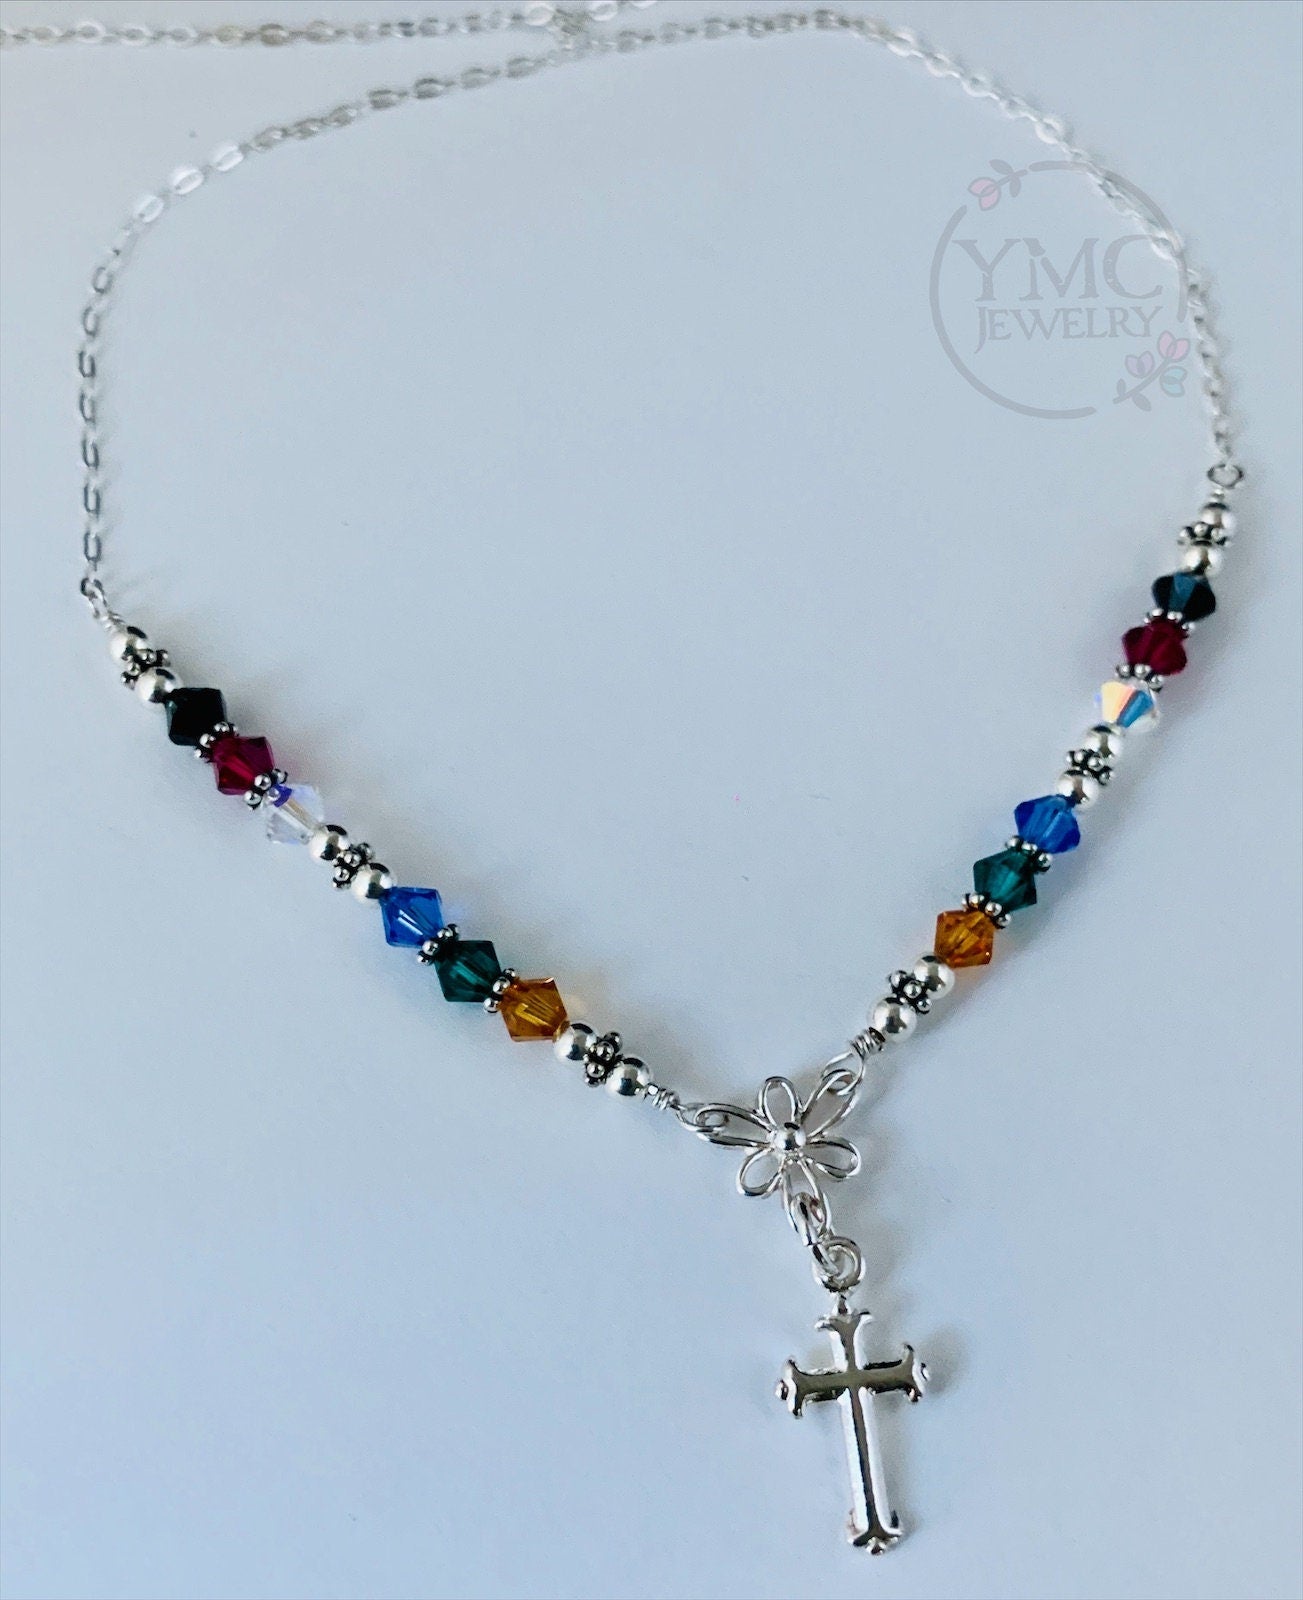 Salvation Necklace,Confirmation Necklace,First Communion Necklace,Prayer Necklace,Easter Necklace,Cross Colorful Crystal Religious Necklace